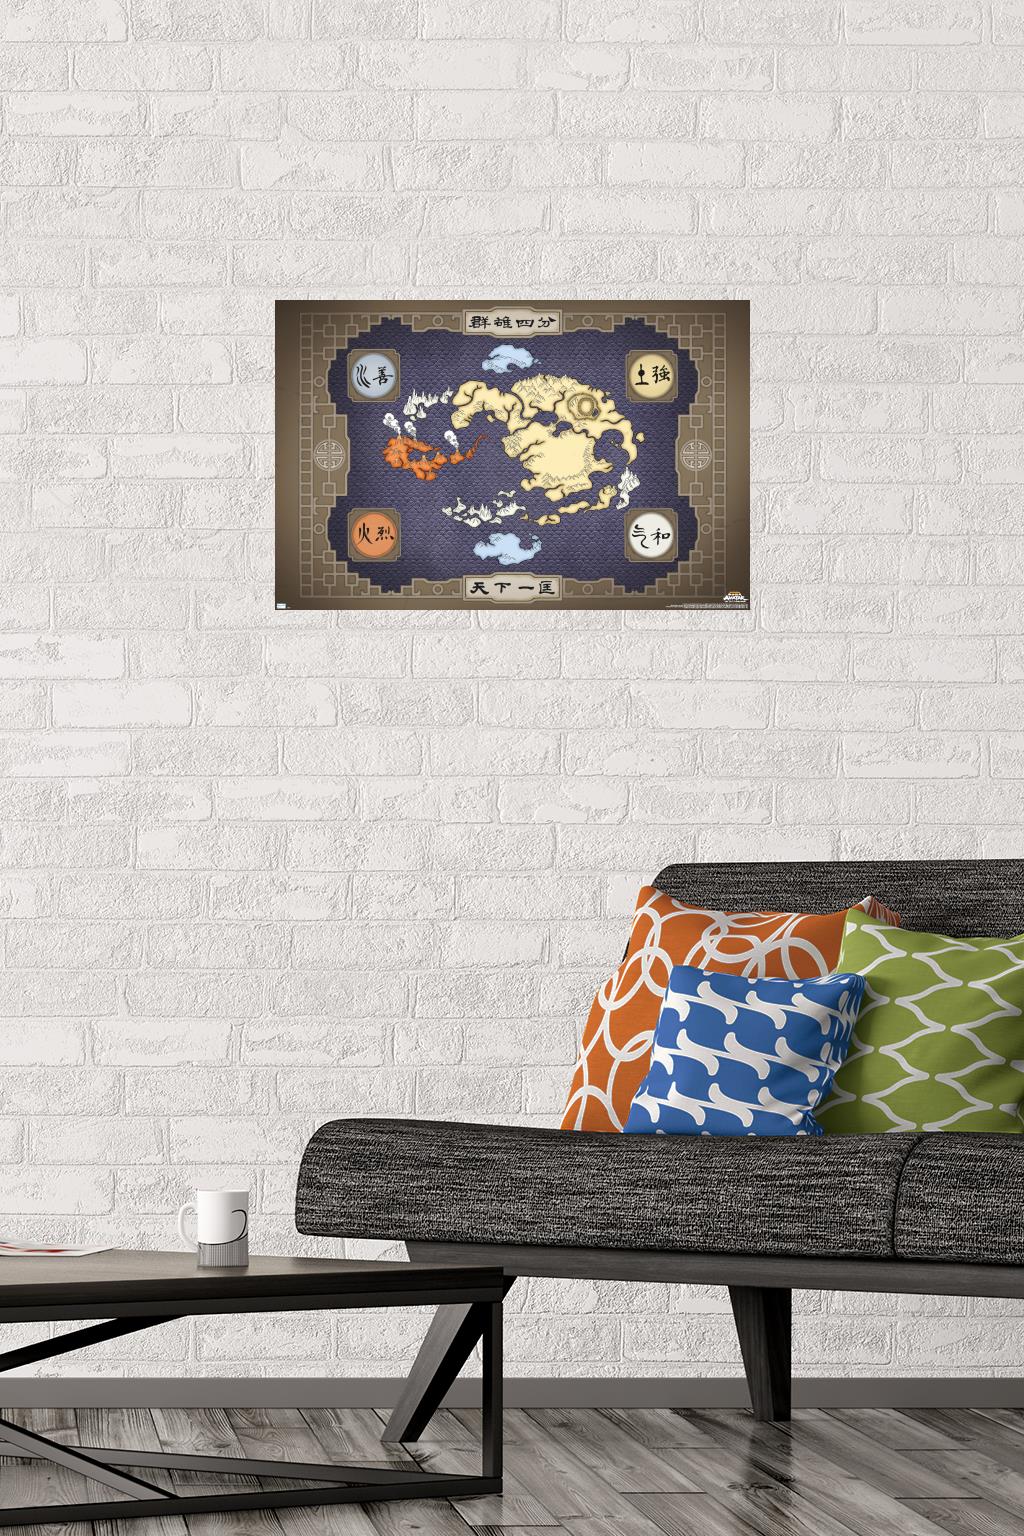 Avatar - Map Wall Poster, 14.725" x 22.375" - image 2 of 4